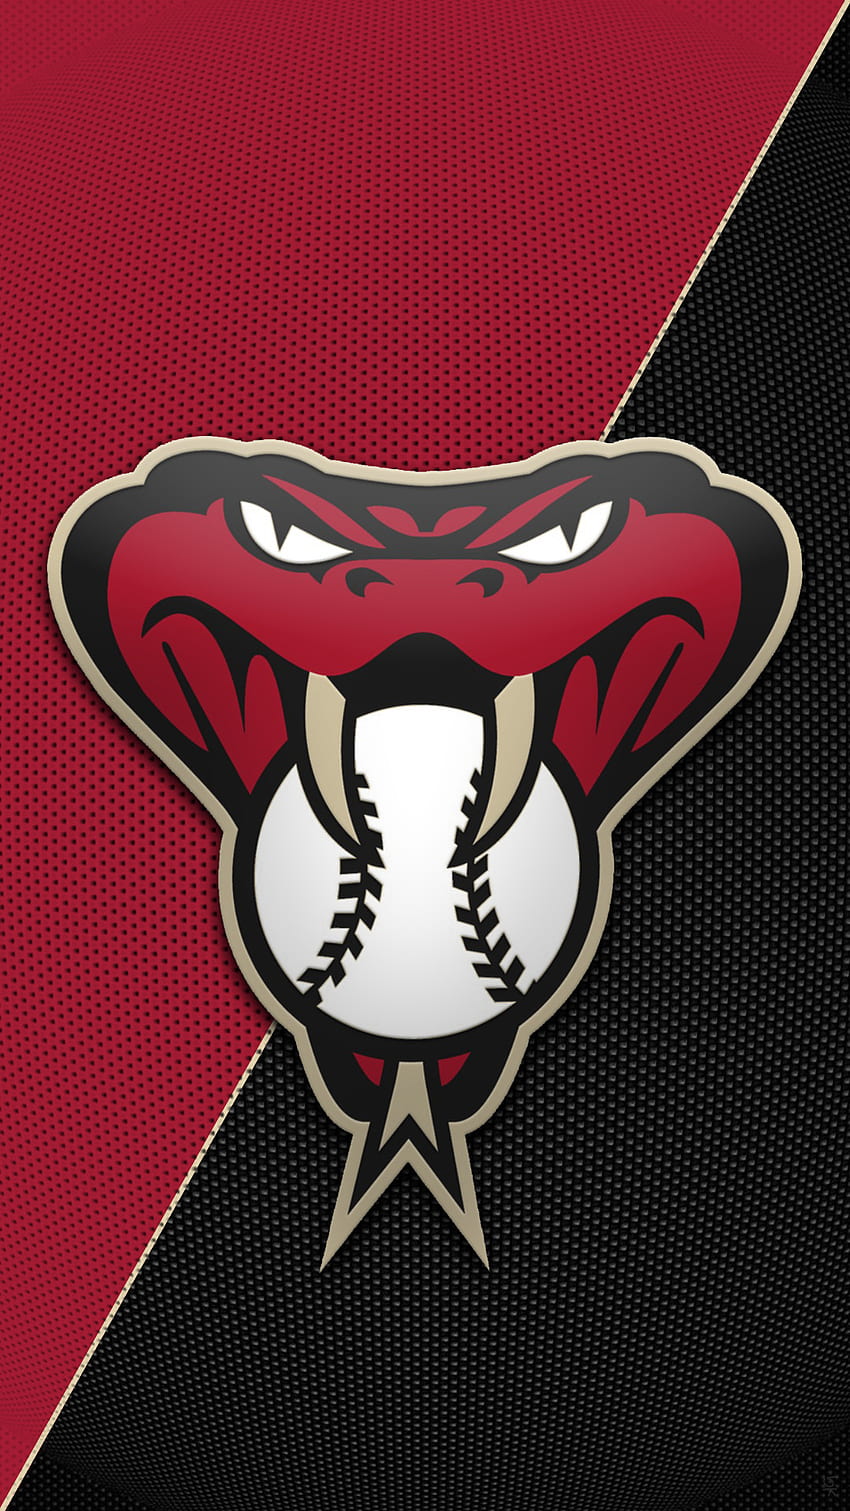 Hey Tigger can you make another Arizona Diamondbacks snakehead logo like you did before for me but in their old school colors of copper/ teal ... HD phone wallpaper